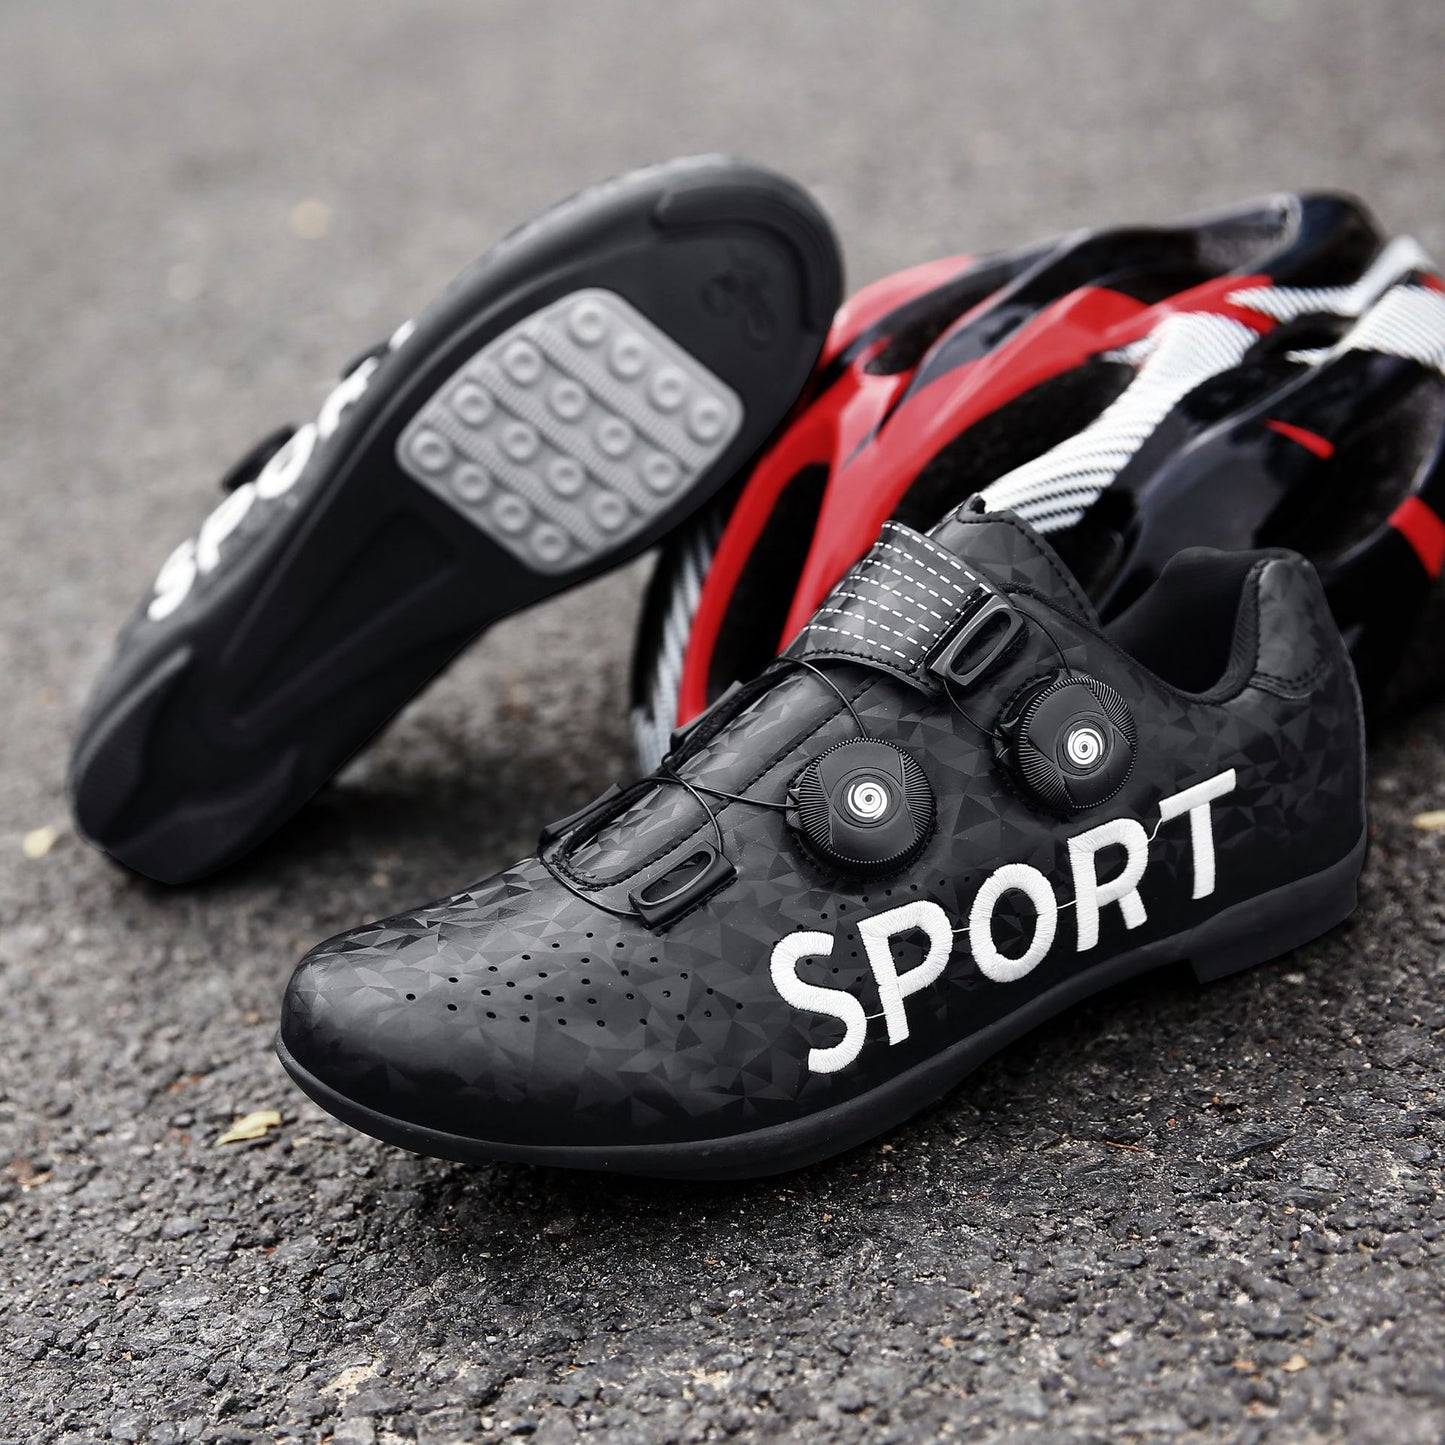 Specialised Unisex Racing Trek Cycling Shoes